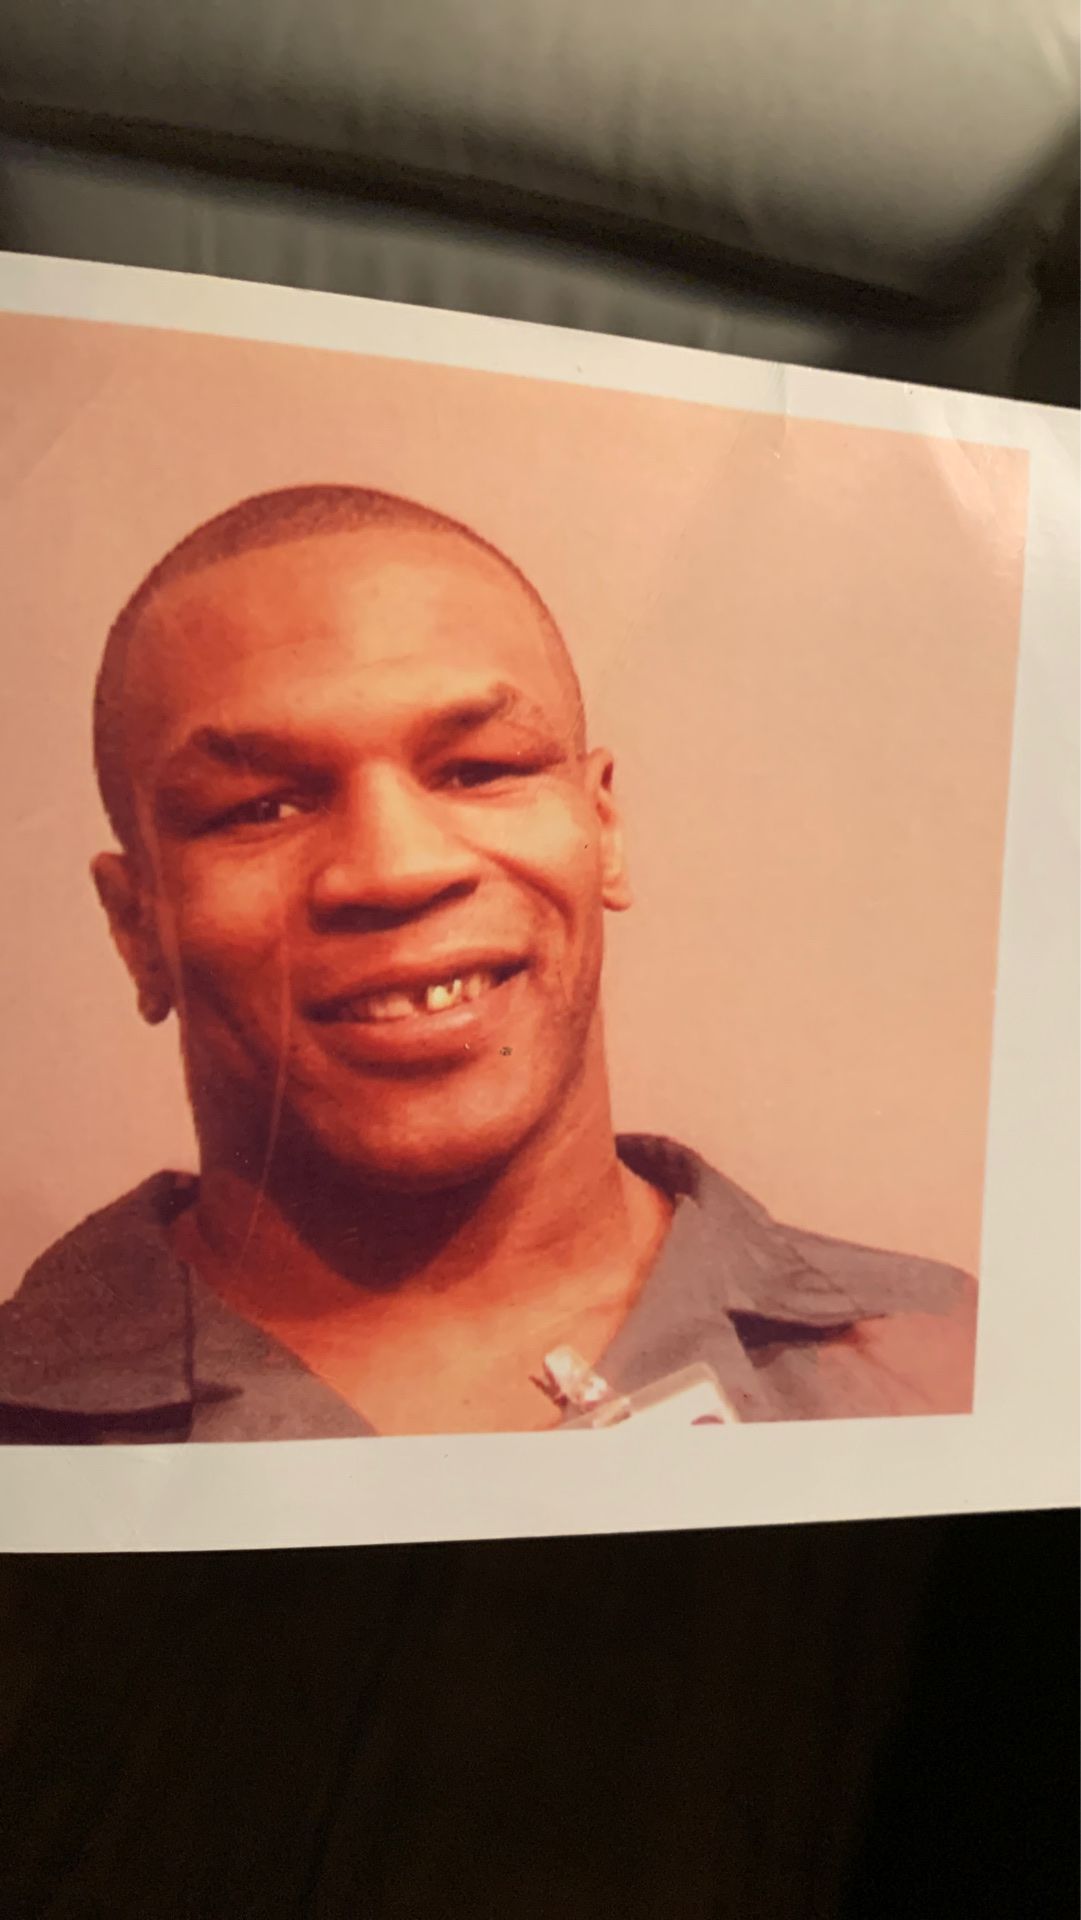 Mike Tyson getting booked in Gaithersburg,Maryland my brother in law was a jail Guard and he gave it to me 28 years ago. 5x4.5 inches